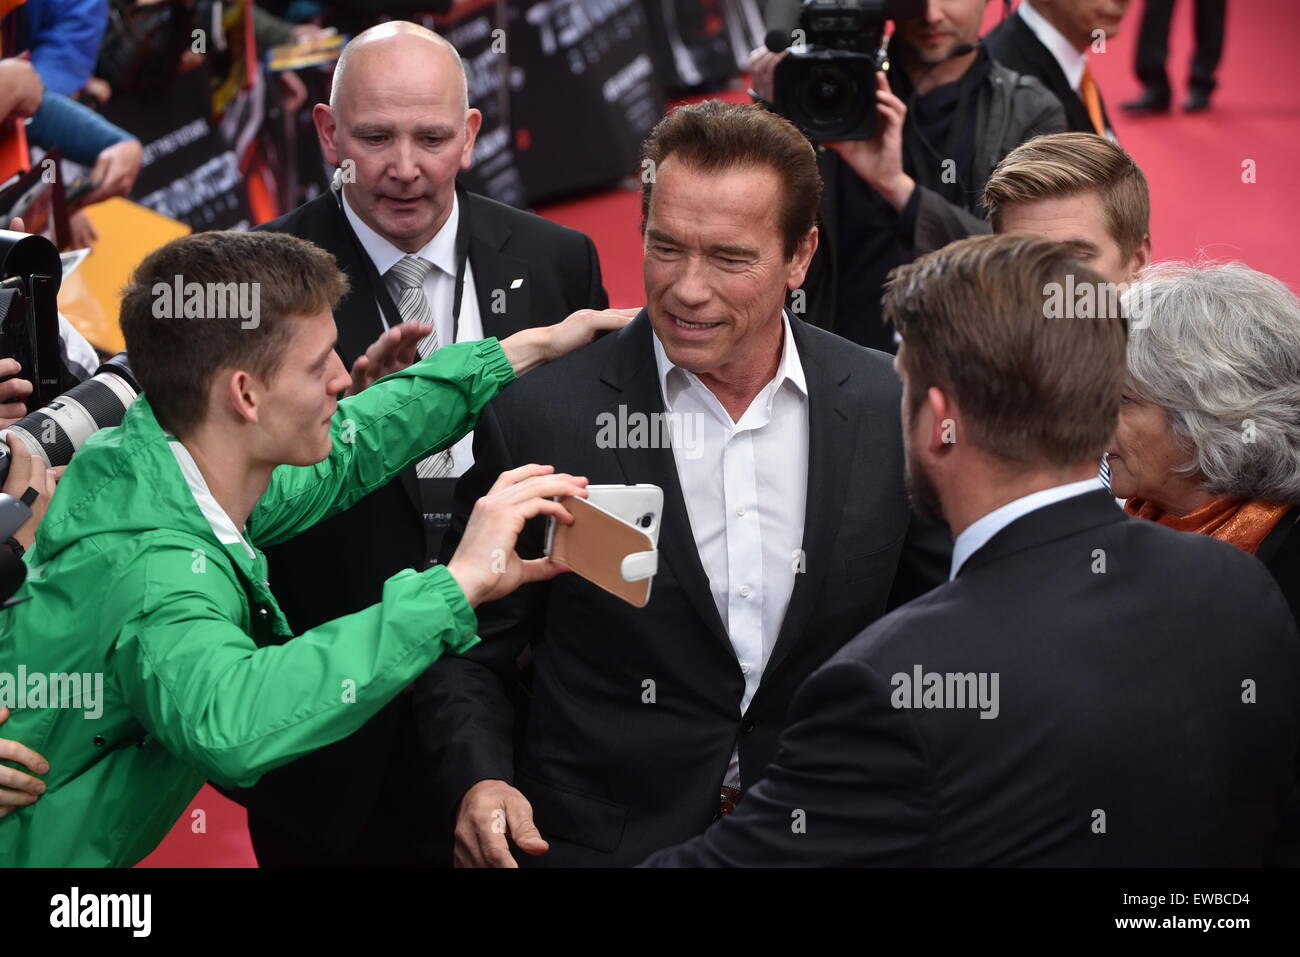 Berlin, Germany. 21st June, 2015. Austrian-American actor and politician Arnold Schwarzenegger attends the Premiere of the movie 'Terminator Genisys' at CineStar Theater at the Sony Center in Berlin, Germany. Credit:  dpa picture alliance/Alamy Live News Stock Photo